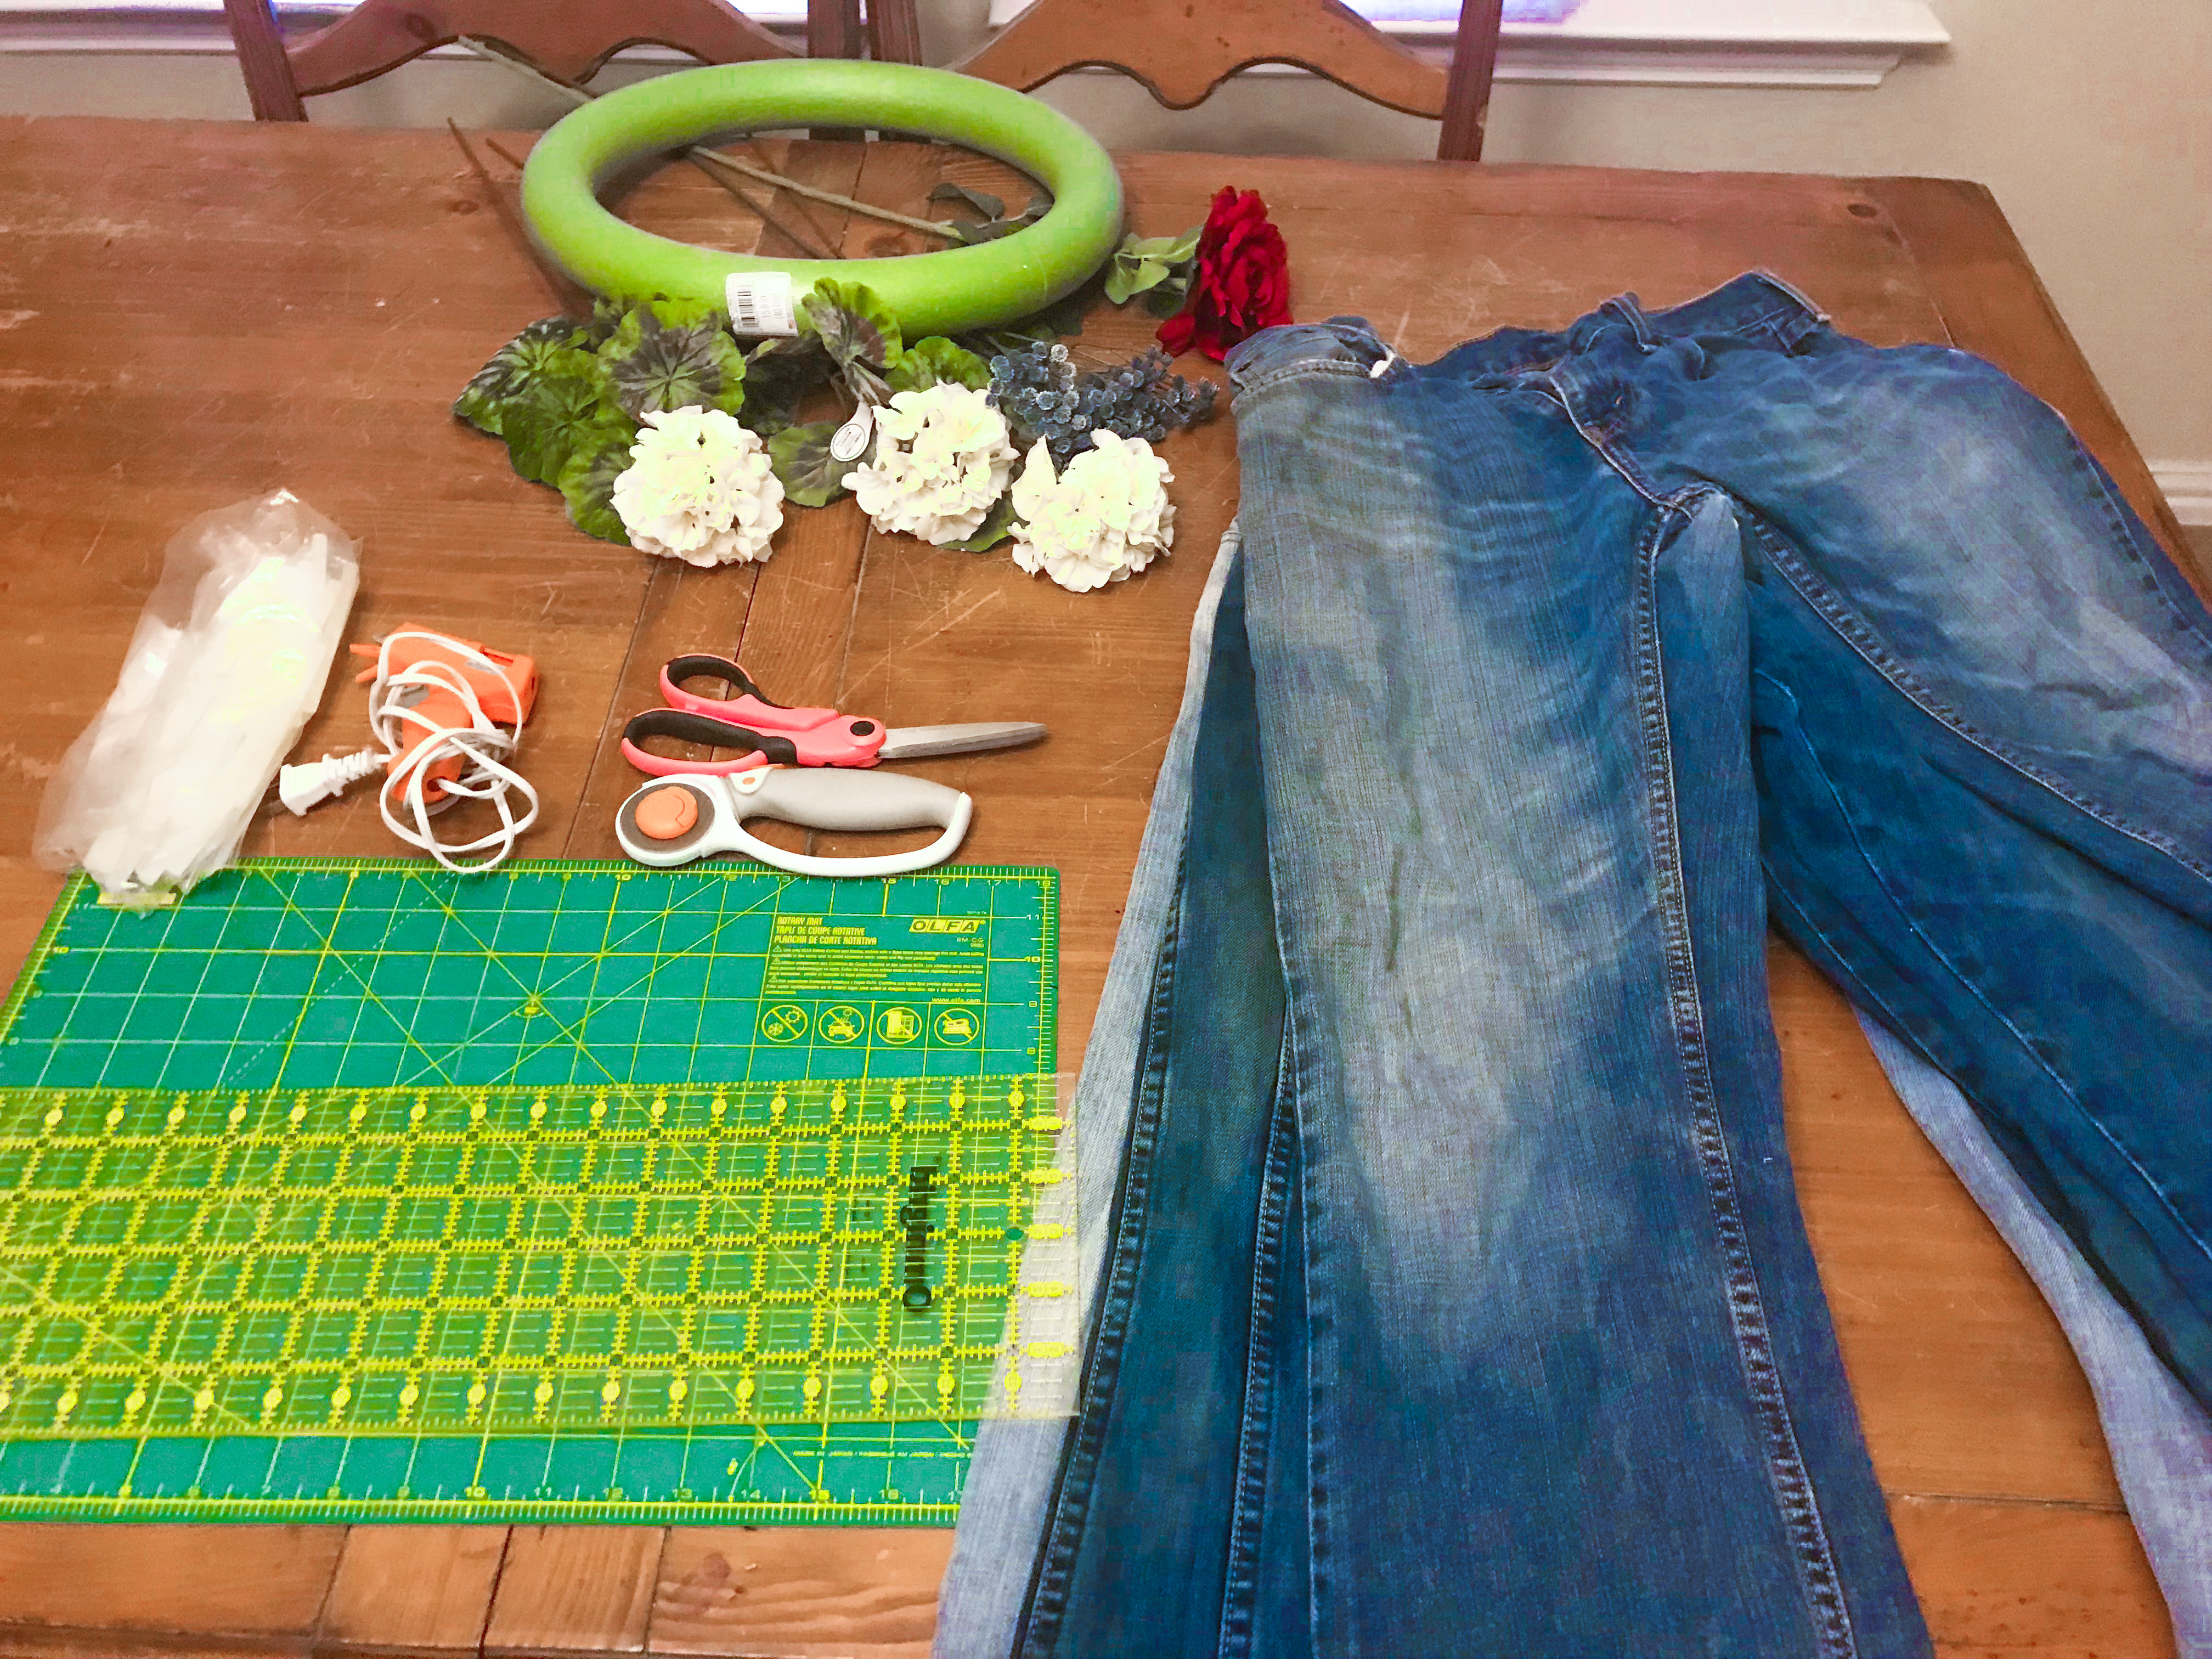 Wreath making supplies and pairs of old jeans.